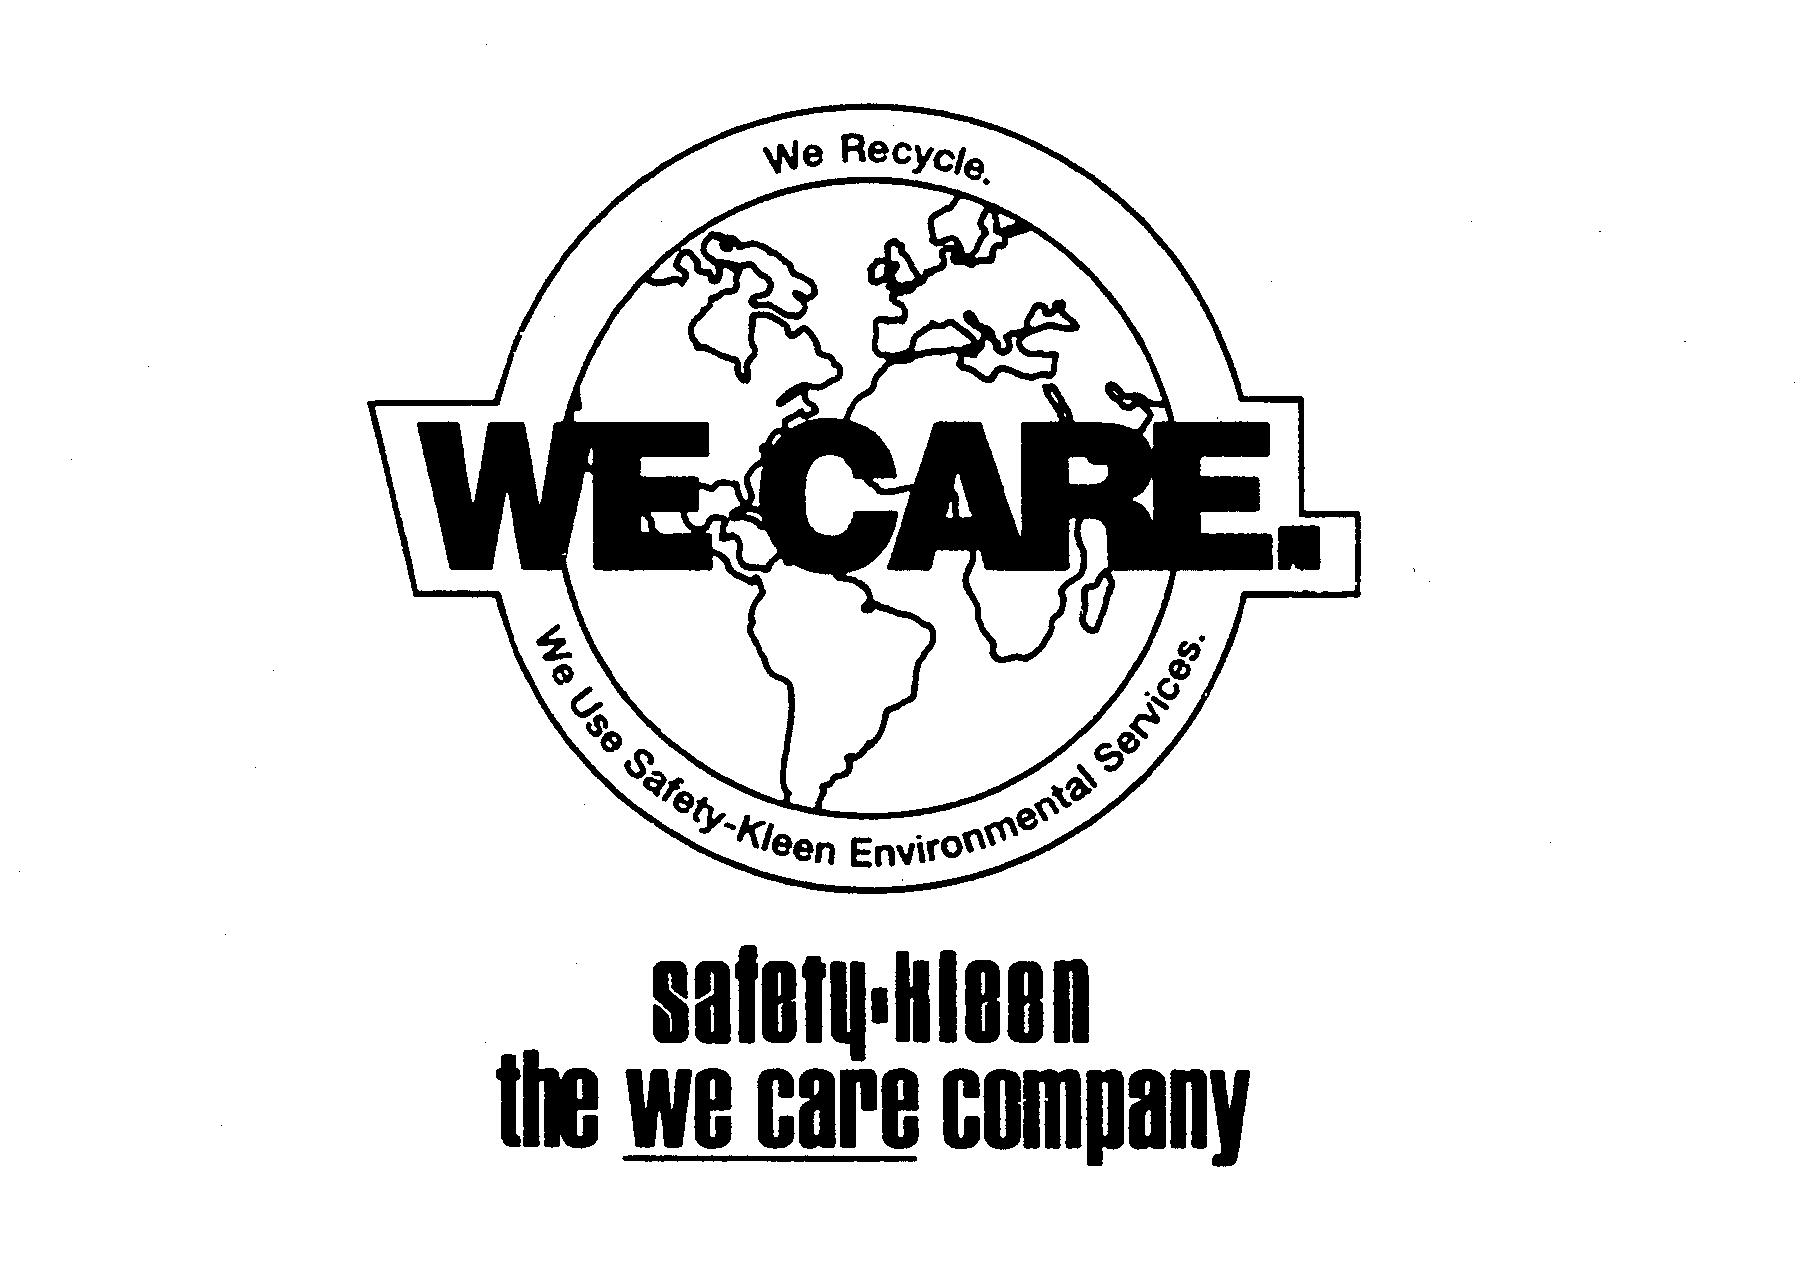 Trademark Logo WE CARE. SAFETY-KLEEN THE WE CARE COMPANY WE RECYCLE. WE USE SAFETY-KLEEN ENVIRONMENTAL SERVICES.